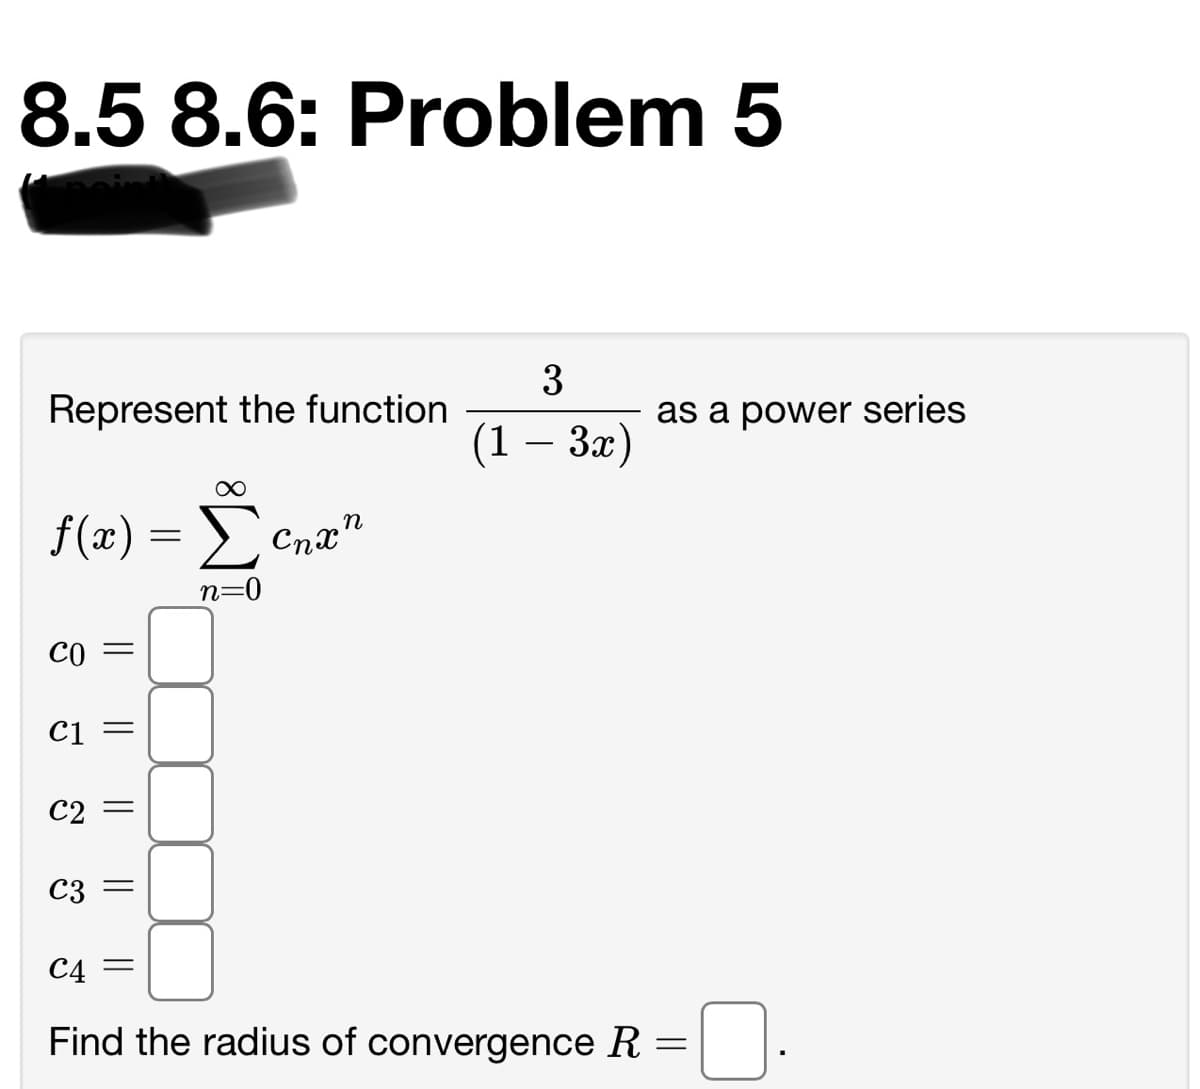 8.5 8.6: Problem 5
3
Represent the function
as a power series
(1 — За)
f(x) = >
n
Cnx"
n=0
Co =
C1
C2
C3
C4 =
Find the radius of convergence R =
||
||
|| ||
